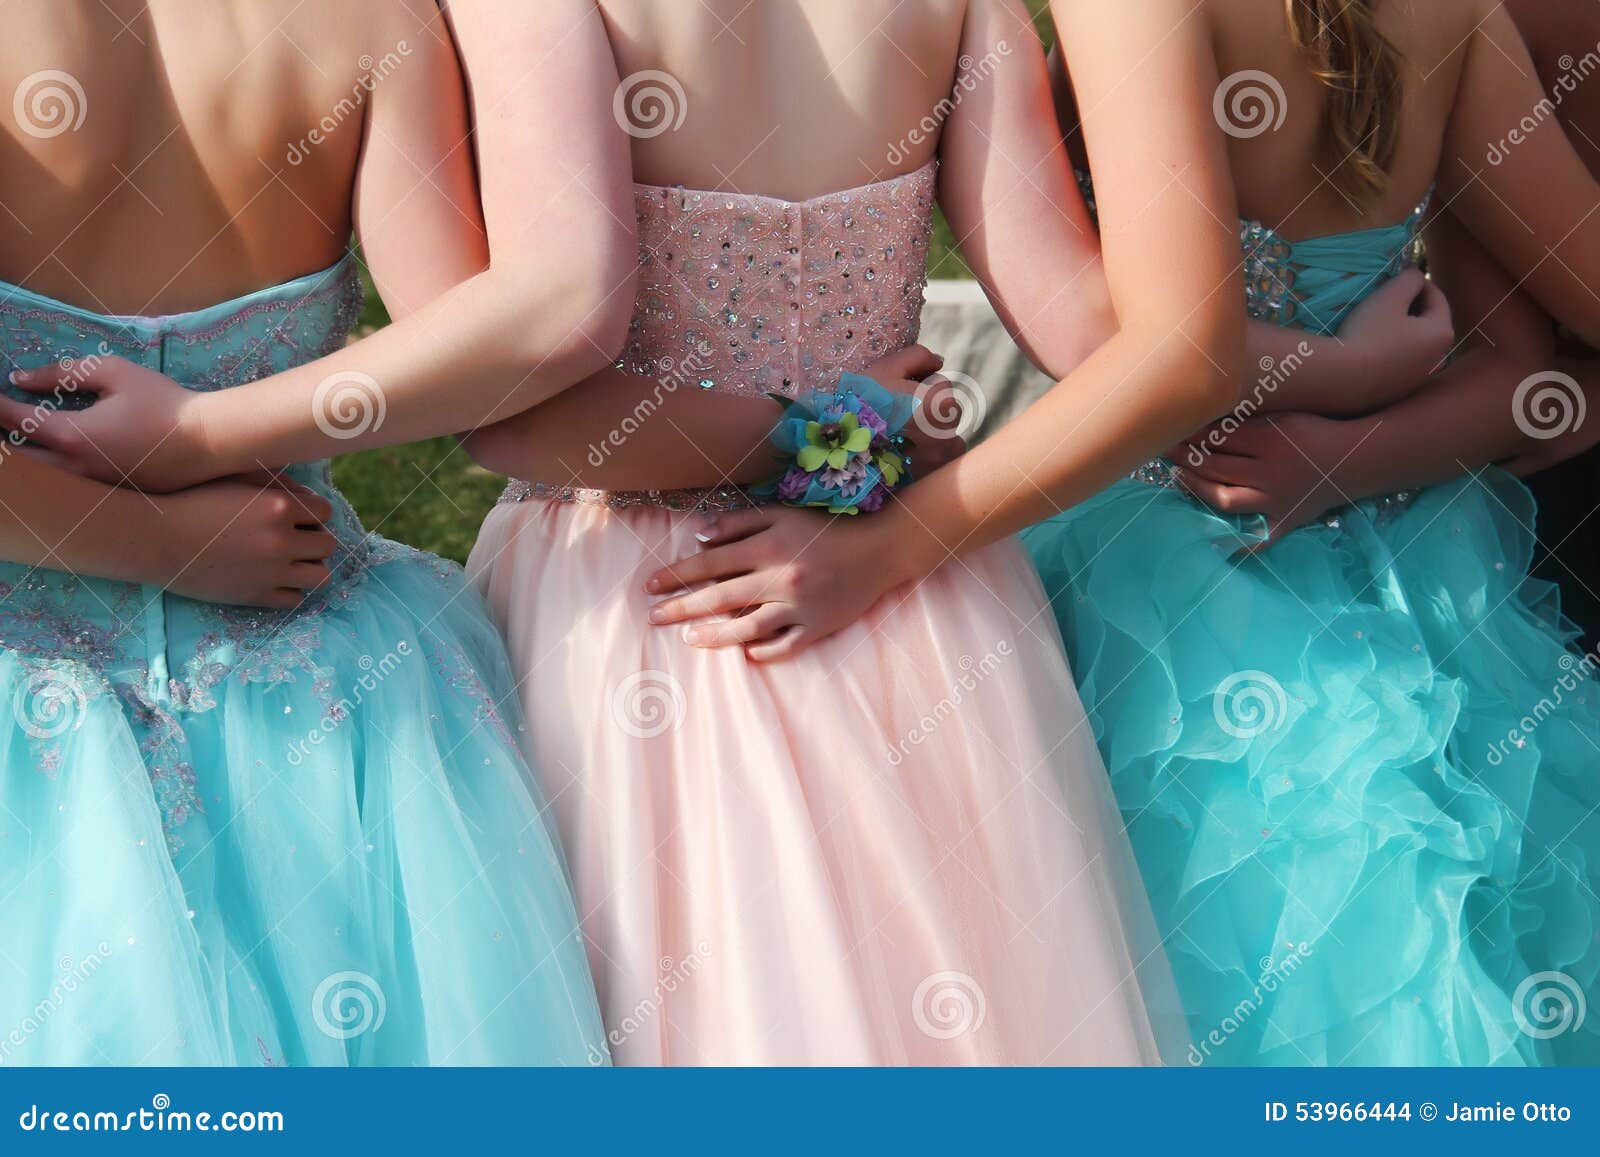 Best Friends Forever stock photo. Image of dance, life - 53966444